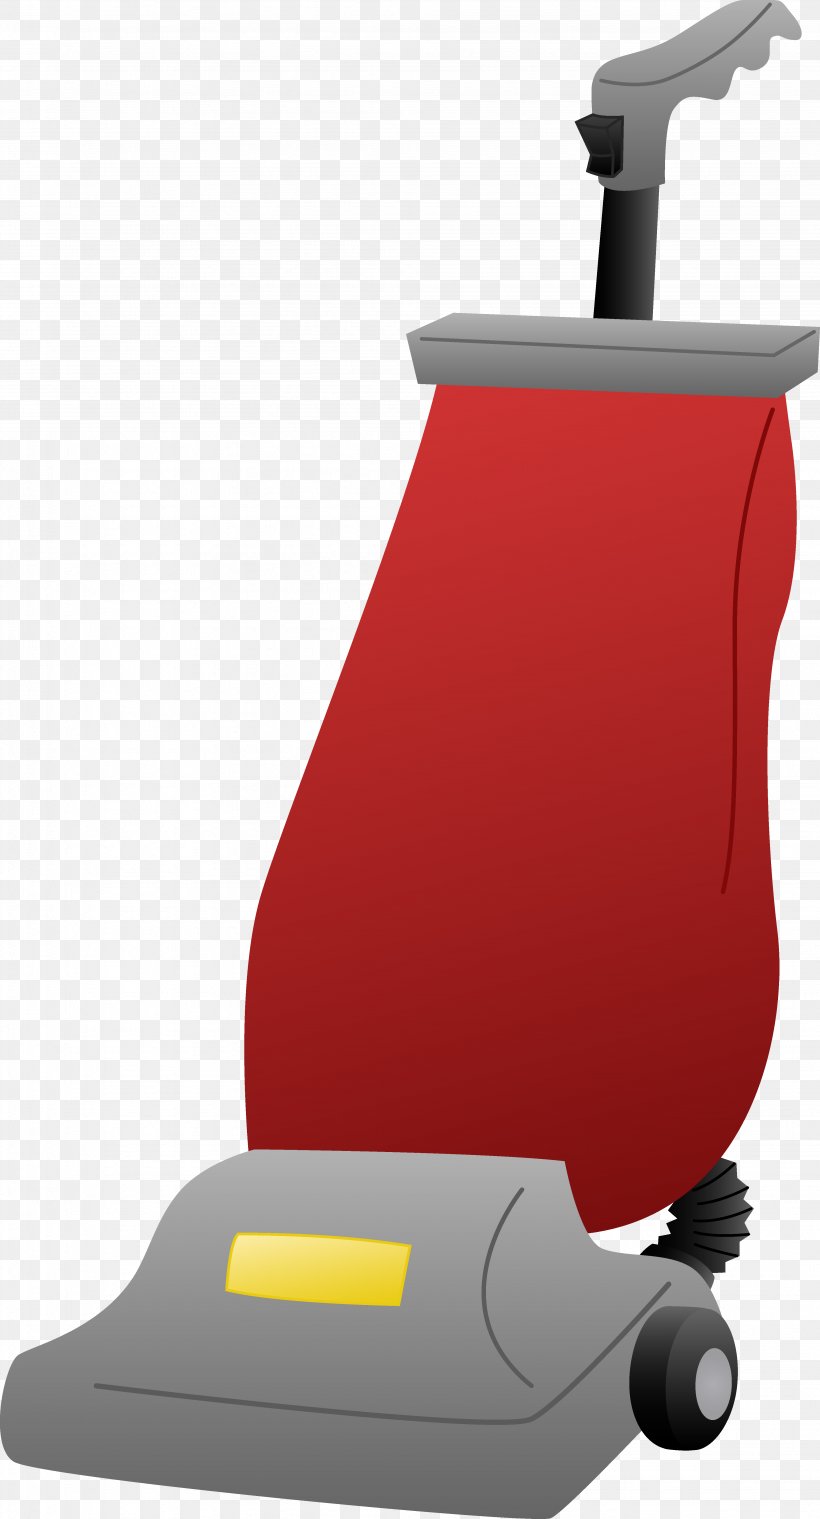 Vacuum Cleaner Clip Art, PNG, 3884x7198px, Vacuum Cleaner, Carpet, Cartoon, Cleaner, Cleaning Download Free